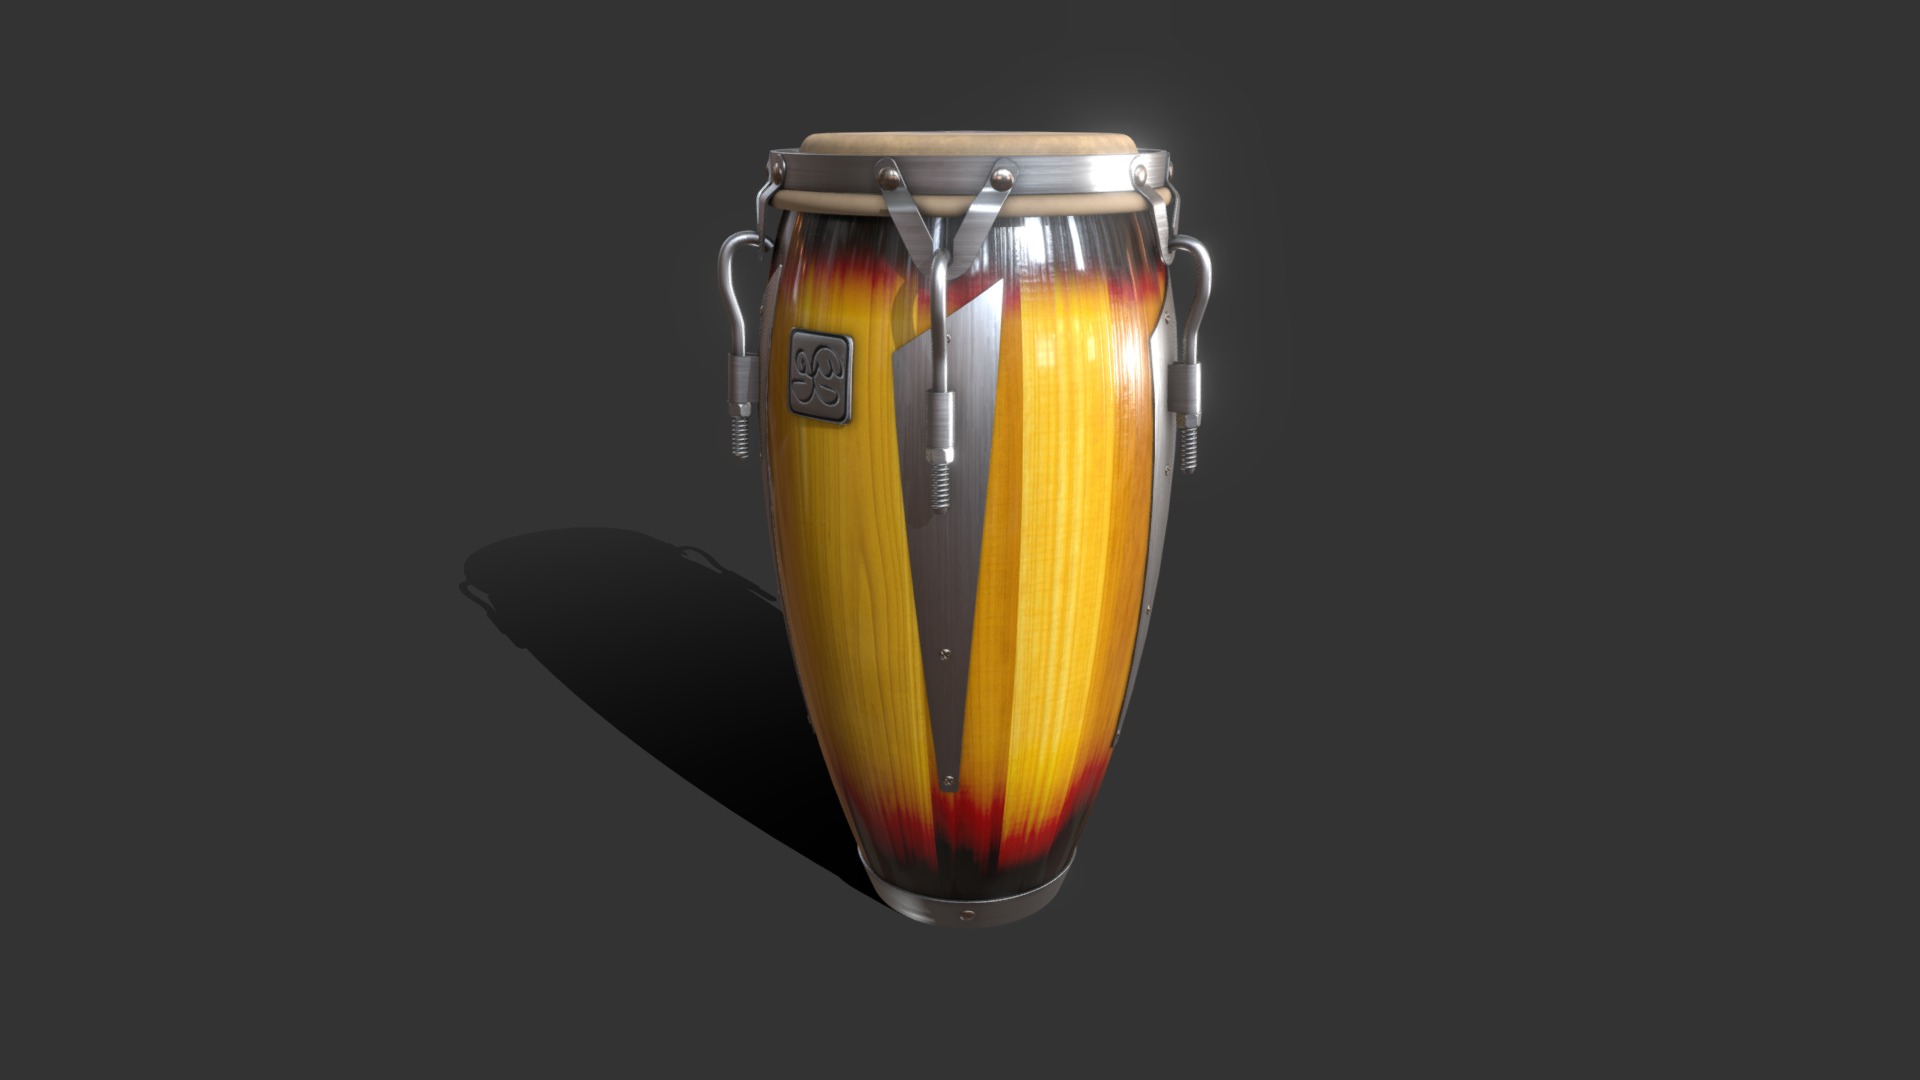 3D model Conga 001 - This is a 3D model of the Conga 001. The 3D model is about a glass of beer.